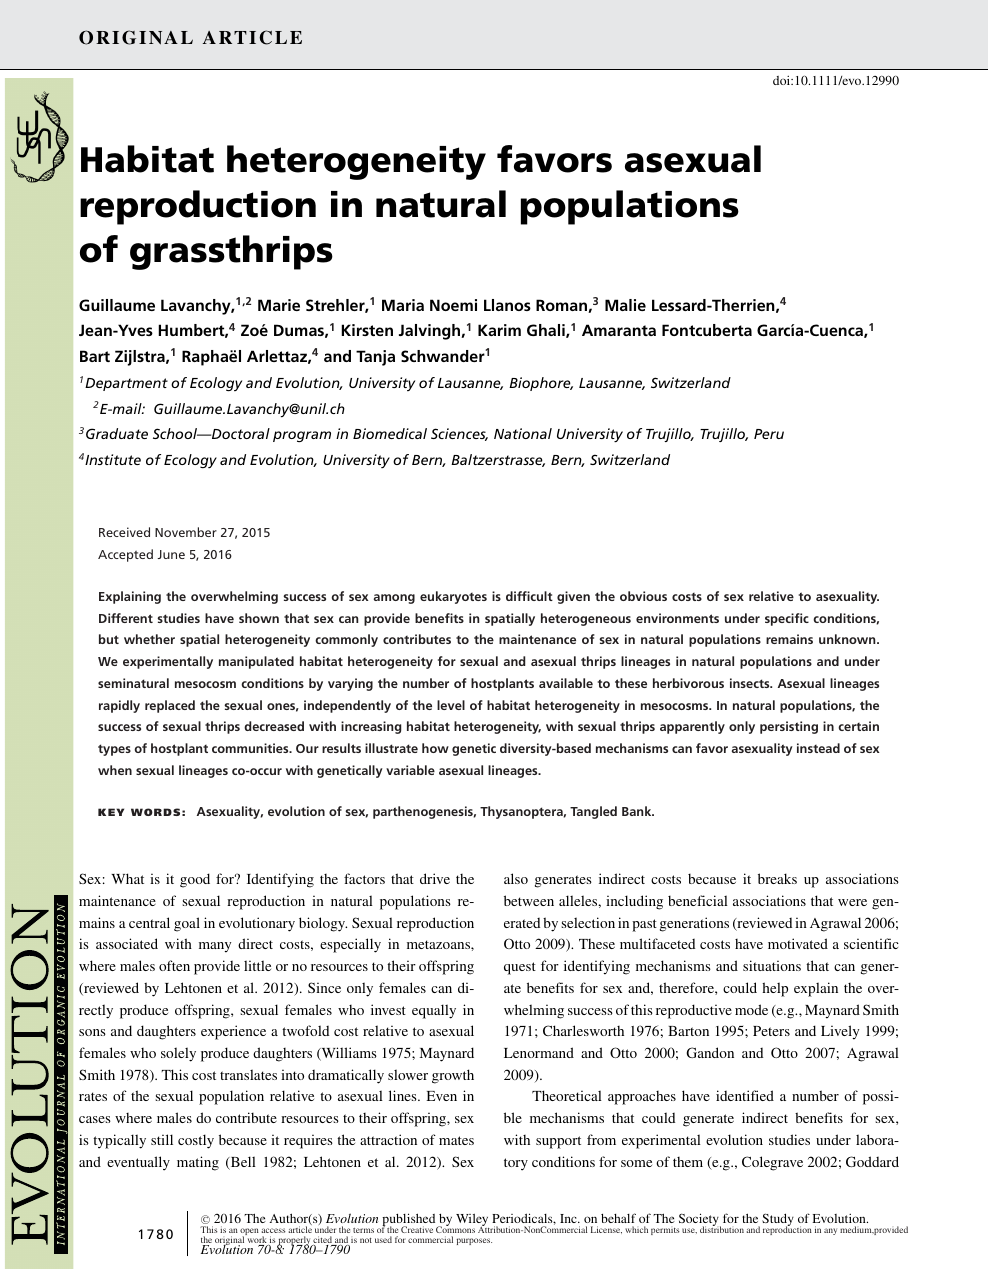 Habitat Heterogeneity Favors Asexual Reproduction In Natural Populations Of Grassthrips Topic Of Research Paper In Biological Sciences Download Scholarly Article Pdf And Read For Free On Cyberleninka Open Science Hub